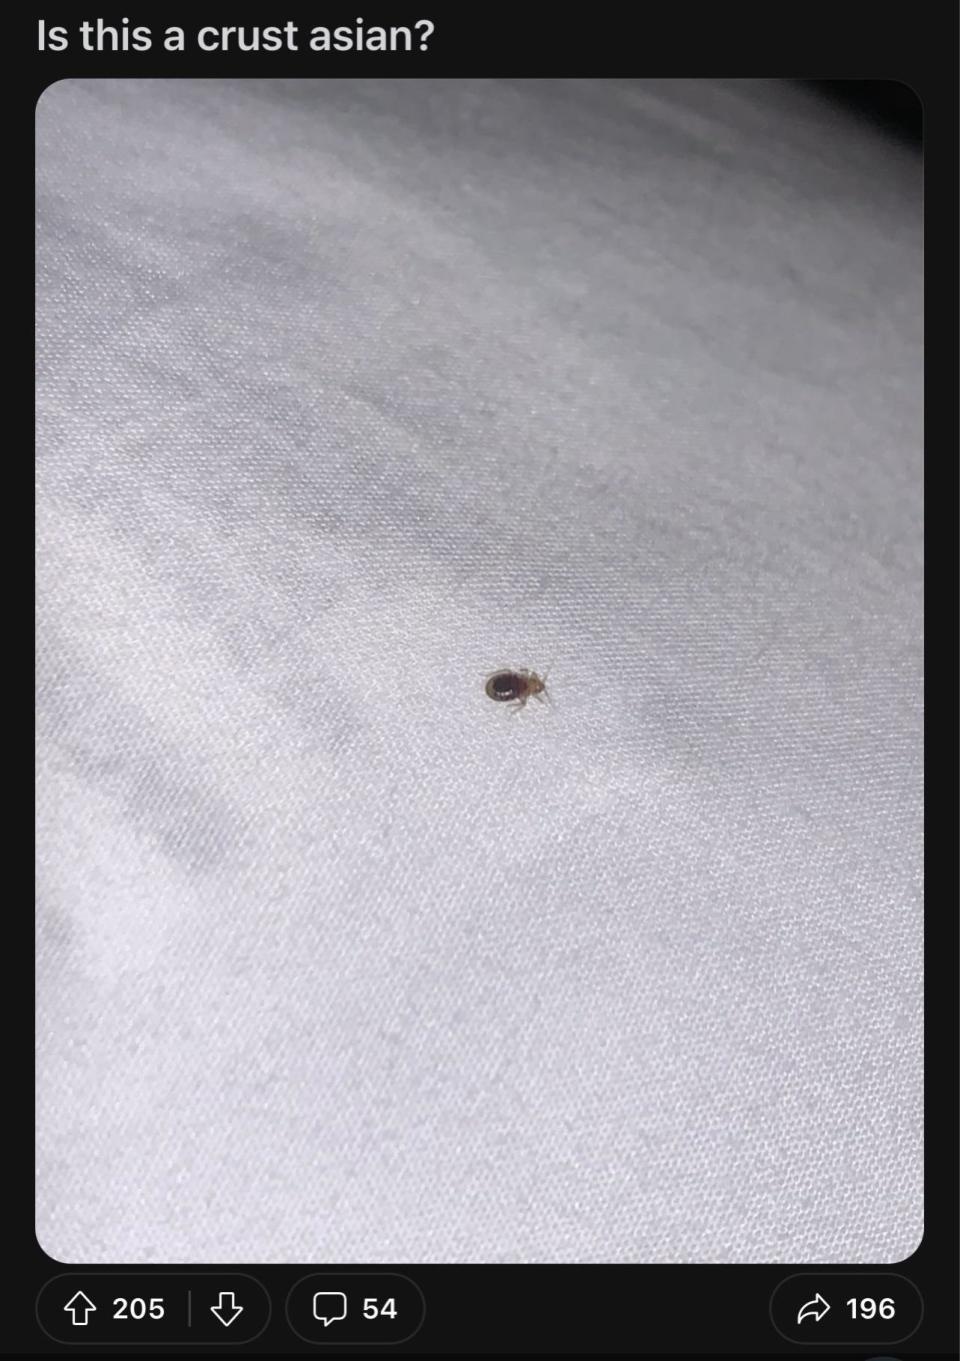 Photo of a small insect with text, "Is that a crust asian?"